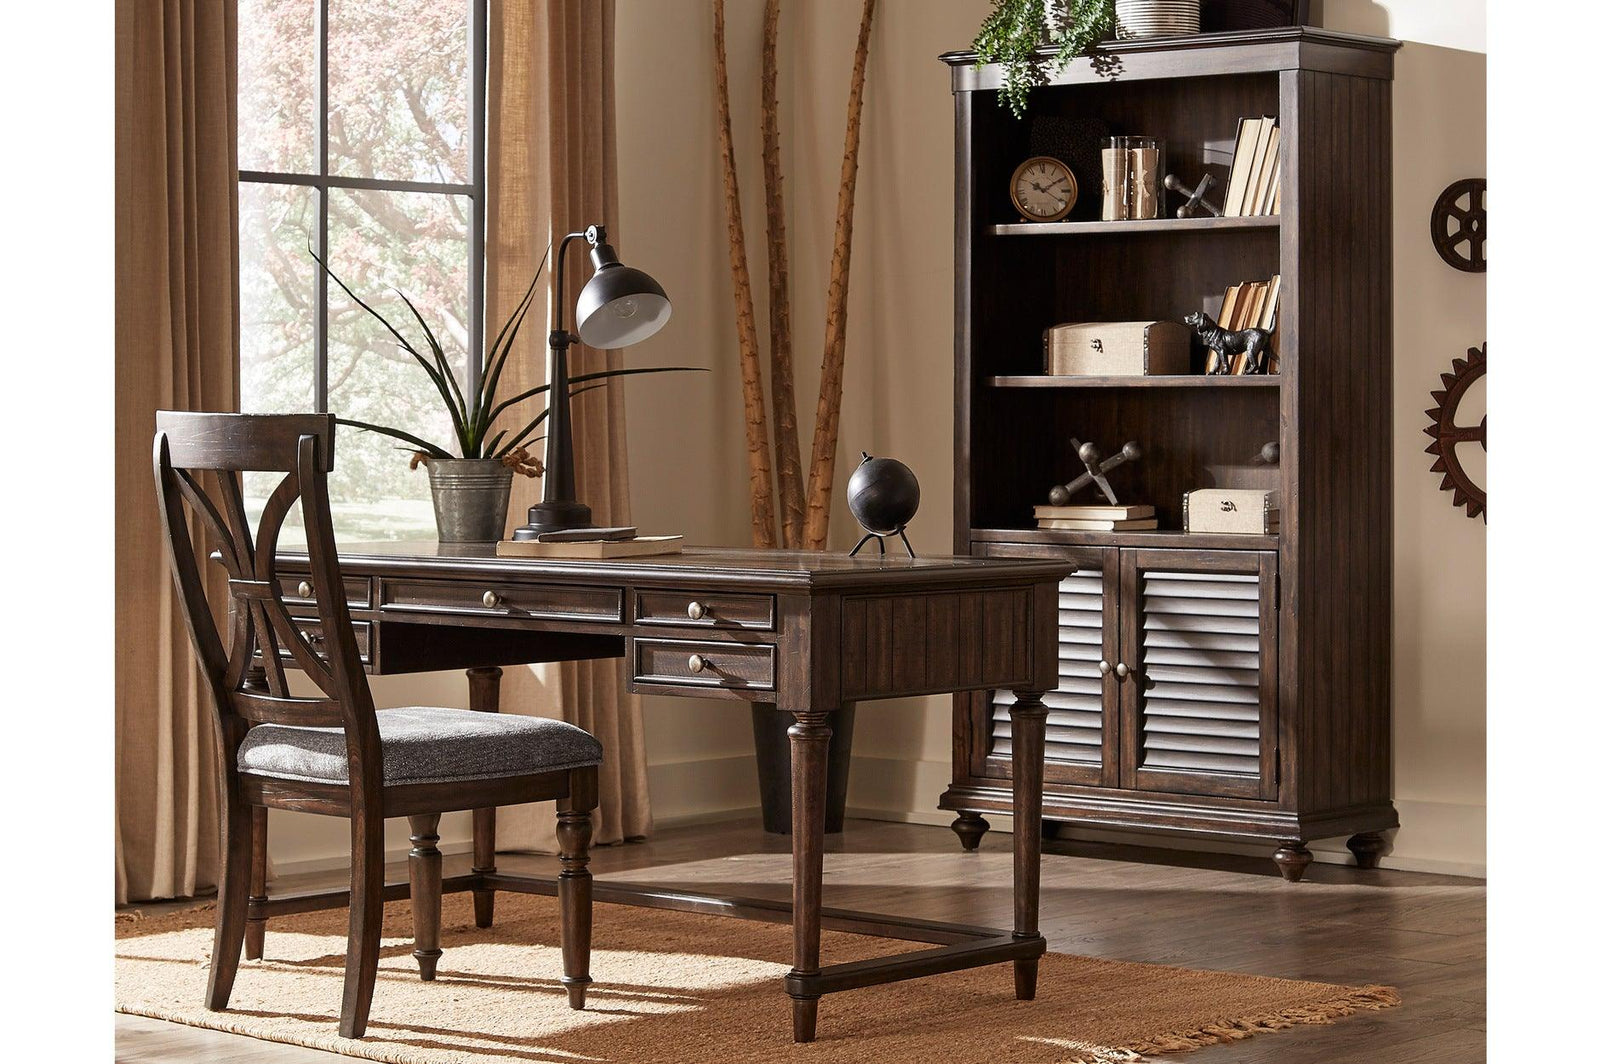 Cardano Charcoal Modern Tranisitional Traditional Acacia Solids And Veneers Writing Desk - Ella Furniture